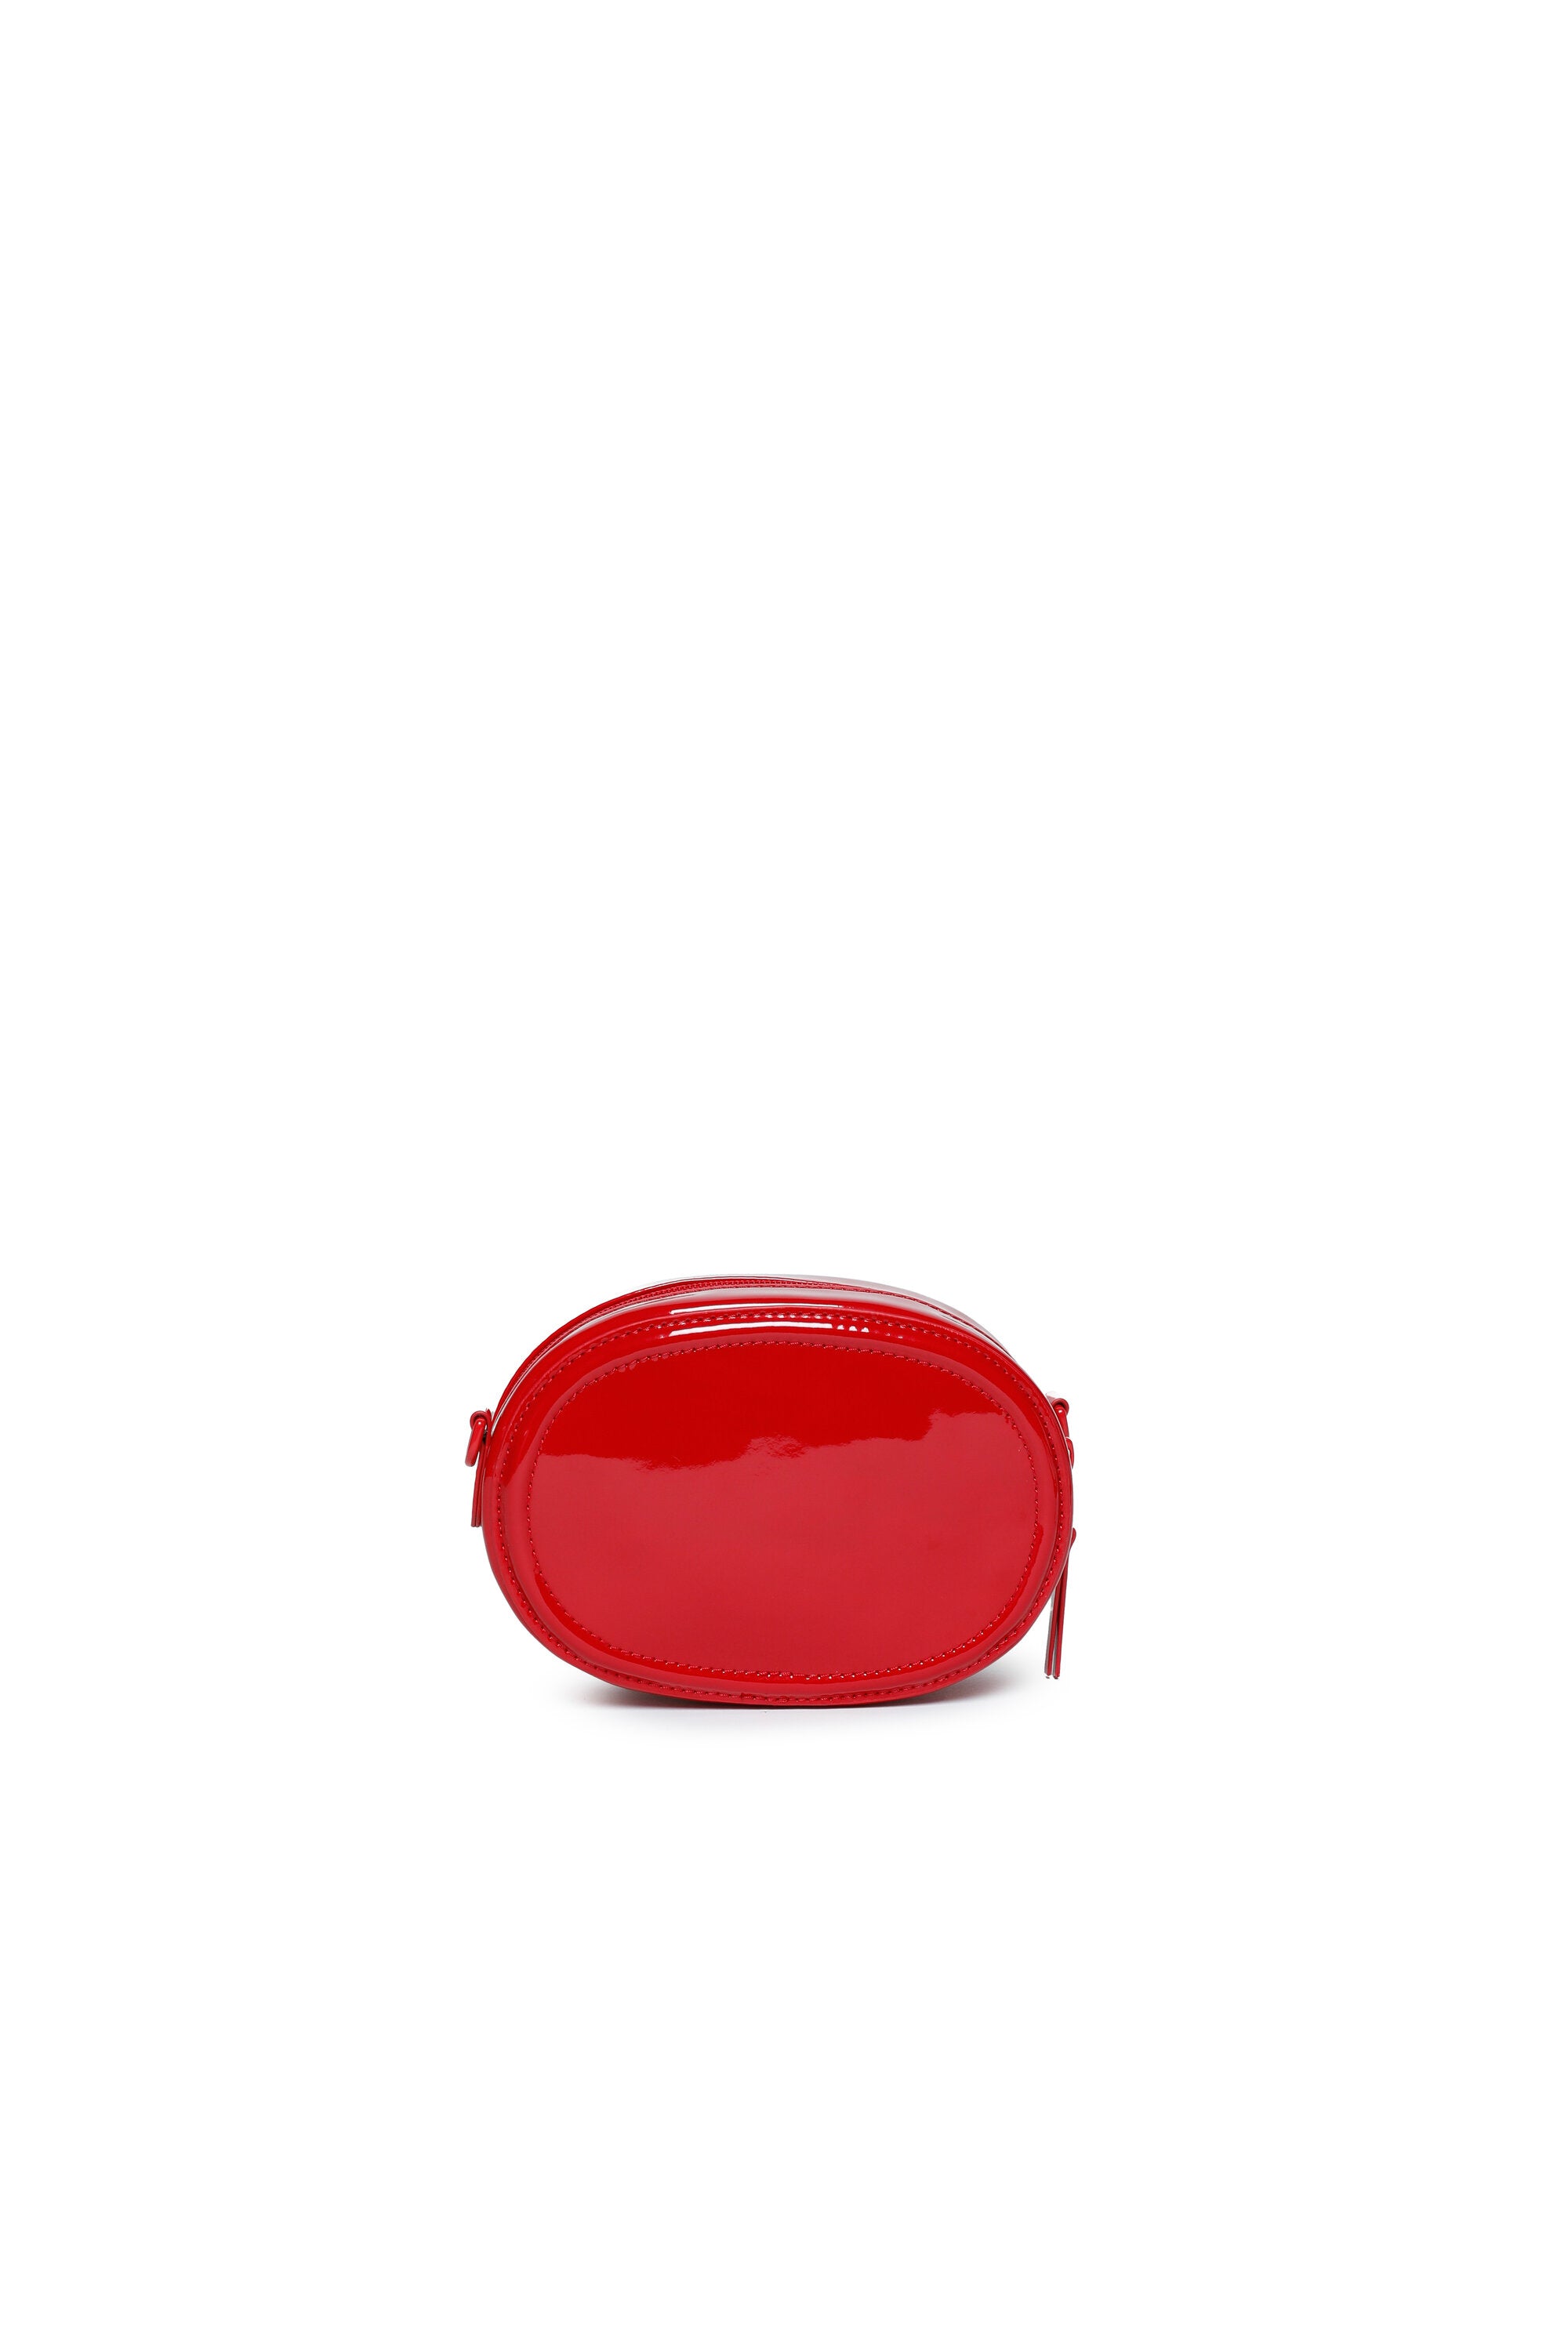 Patent leather effect shoulder bag with embossed logo on the front